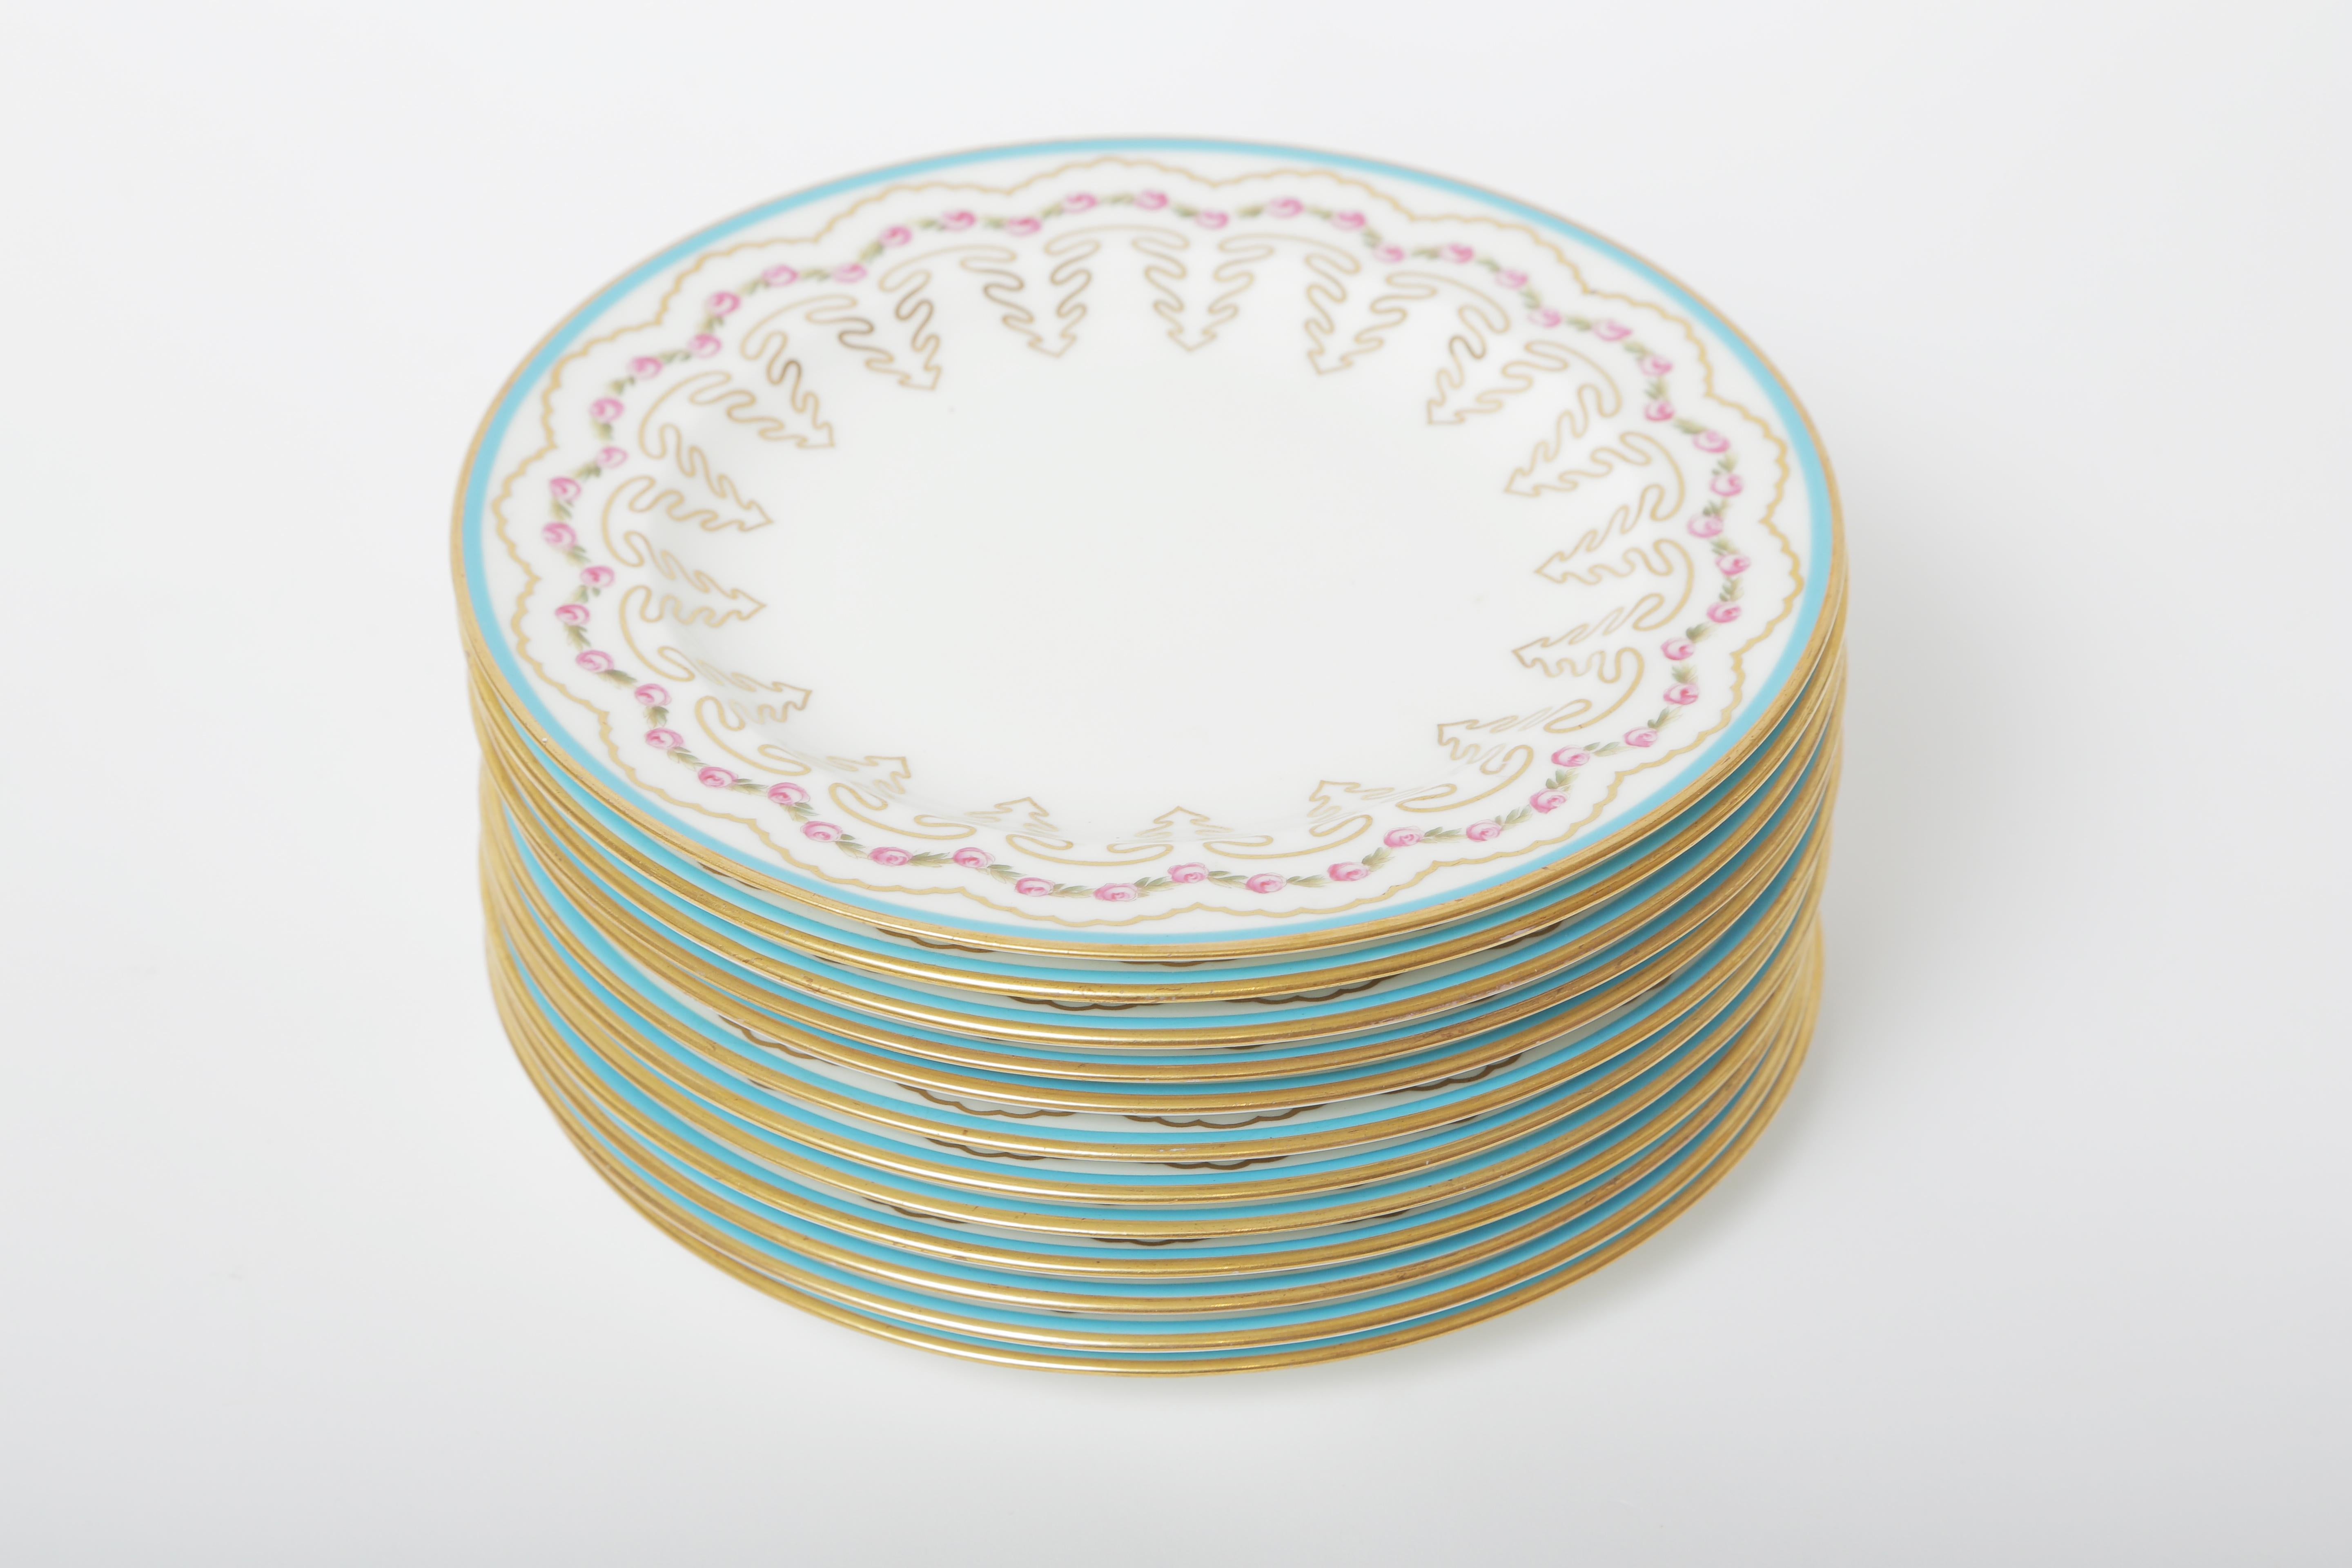 Early 20th Century 12 Turquoise and Pink English Dessert Plates, Antique, circa 1910